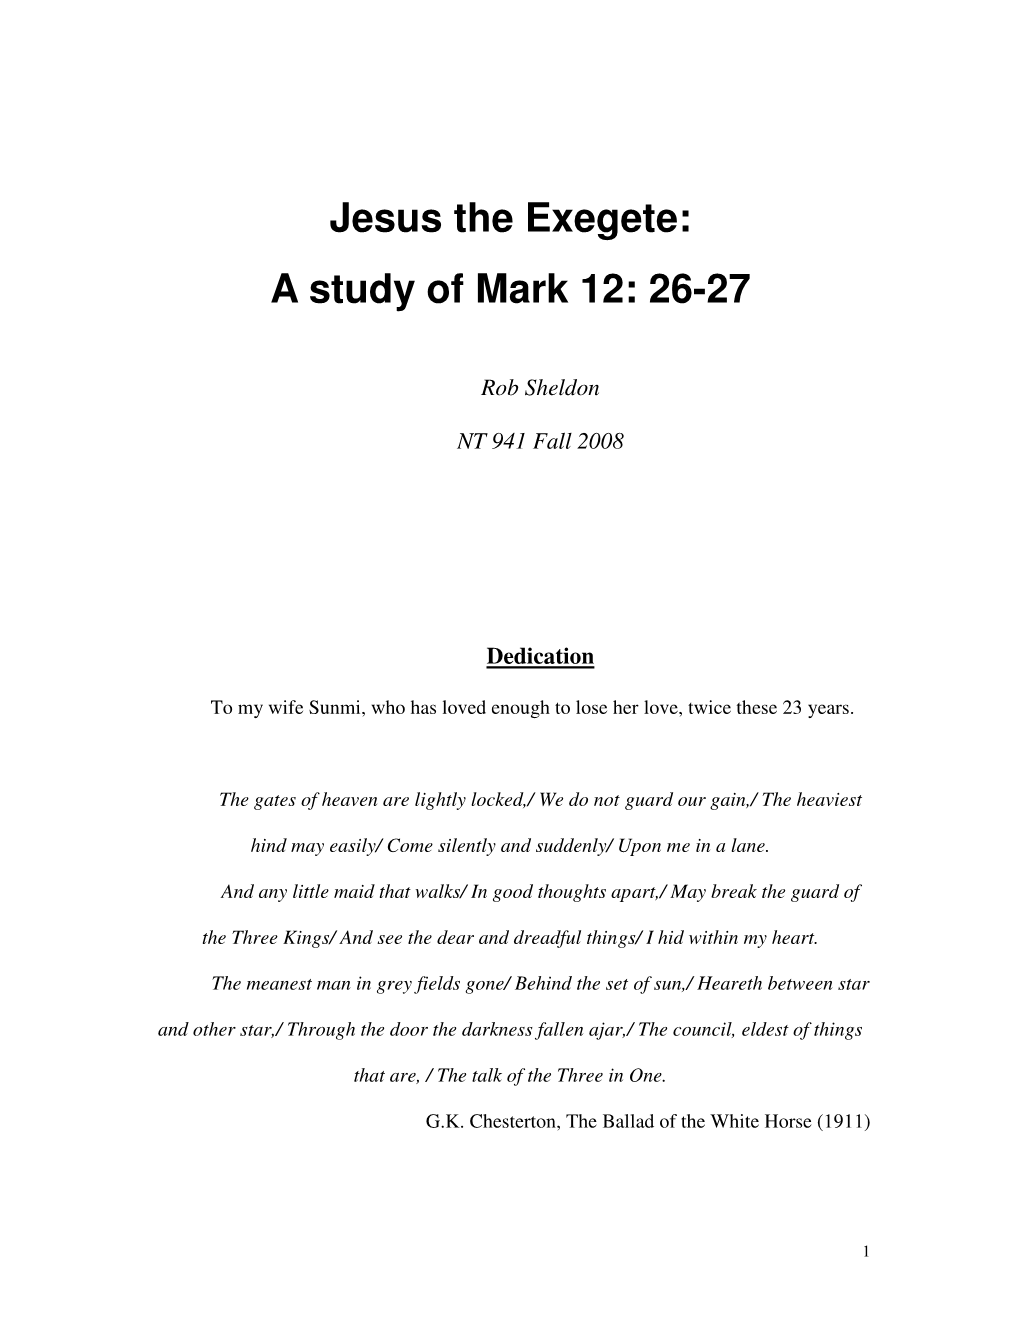 Jesus the Exegete: a Study of Mark 12: 26-27